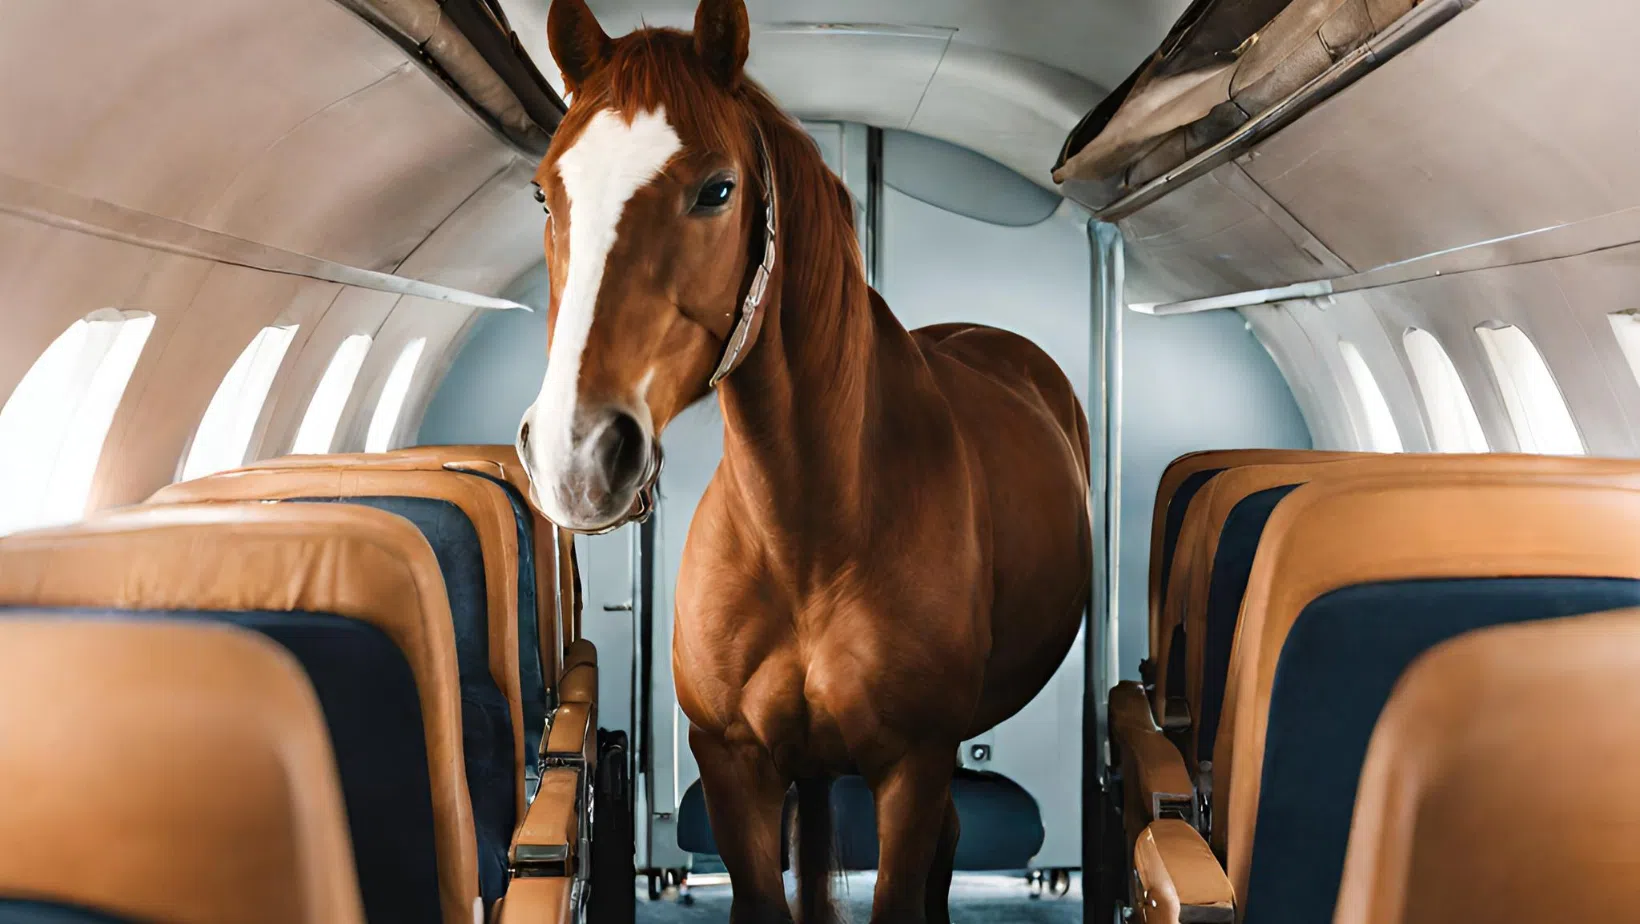 A Horse, Yes a HORSE, Breaks Free from Its Stall in the Aircraft Cargo Hold - Listen to the Audio Clip